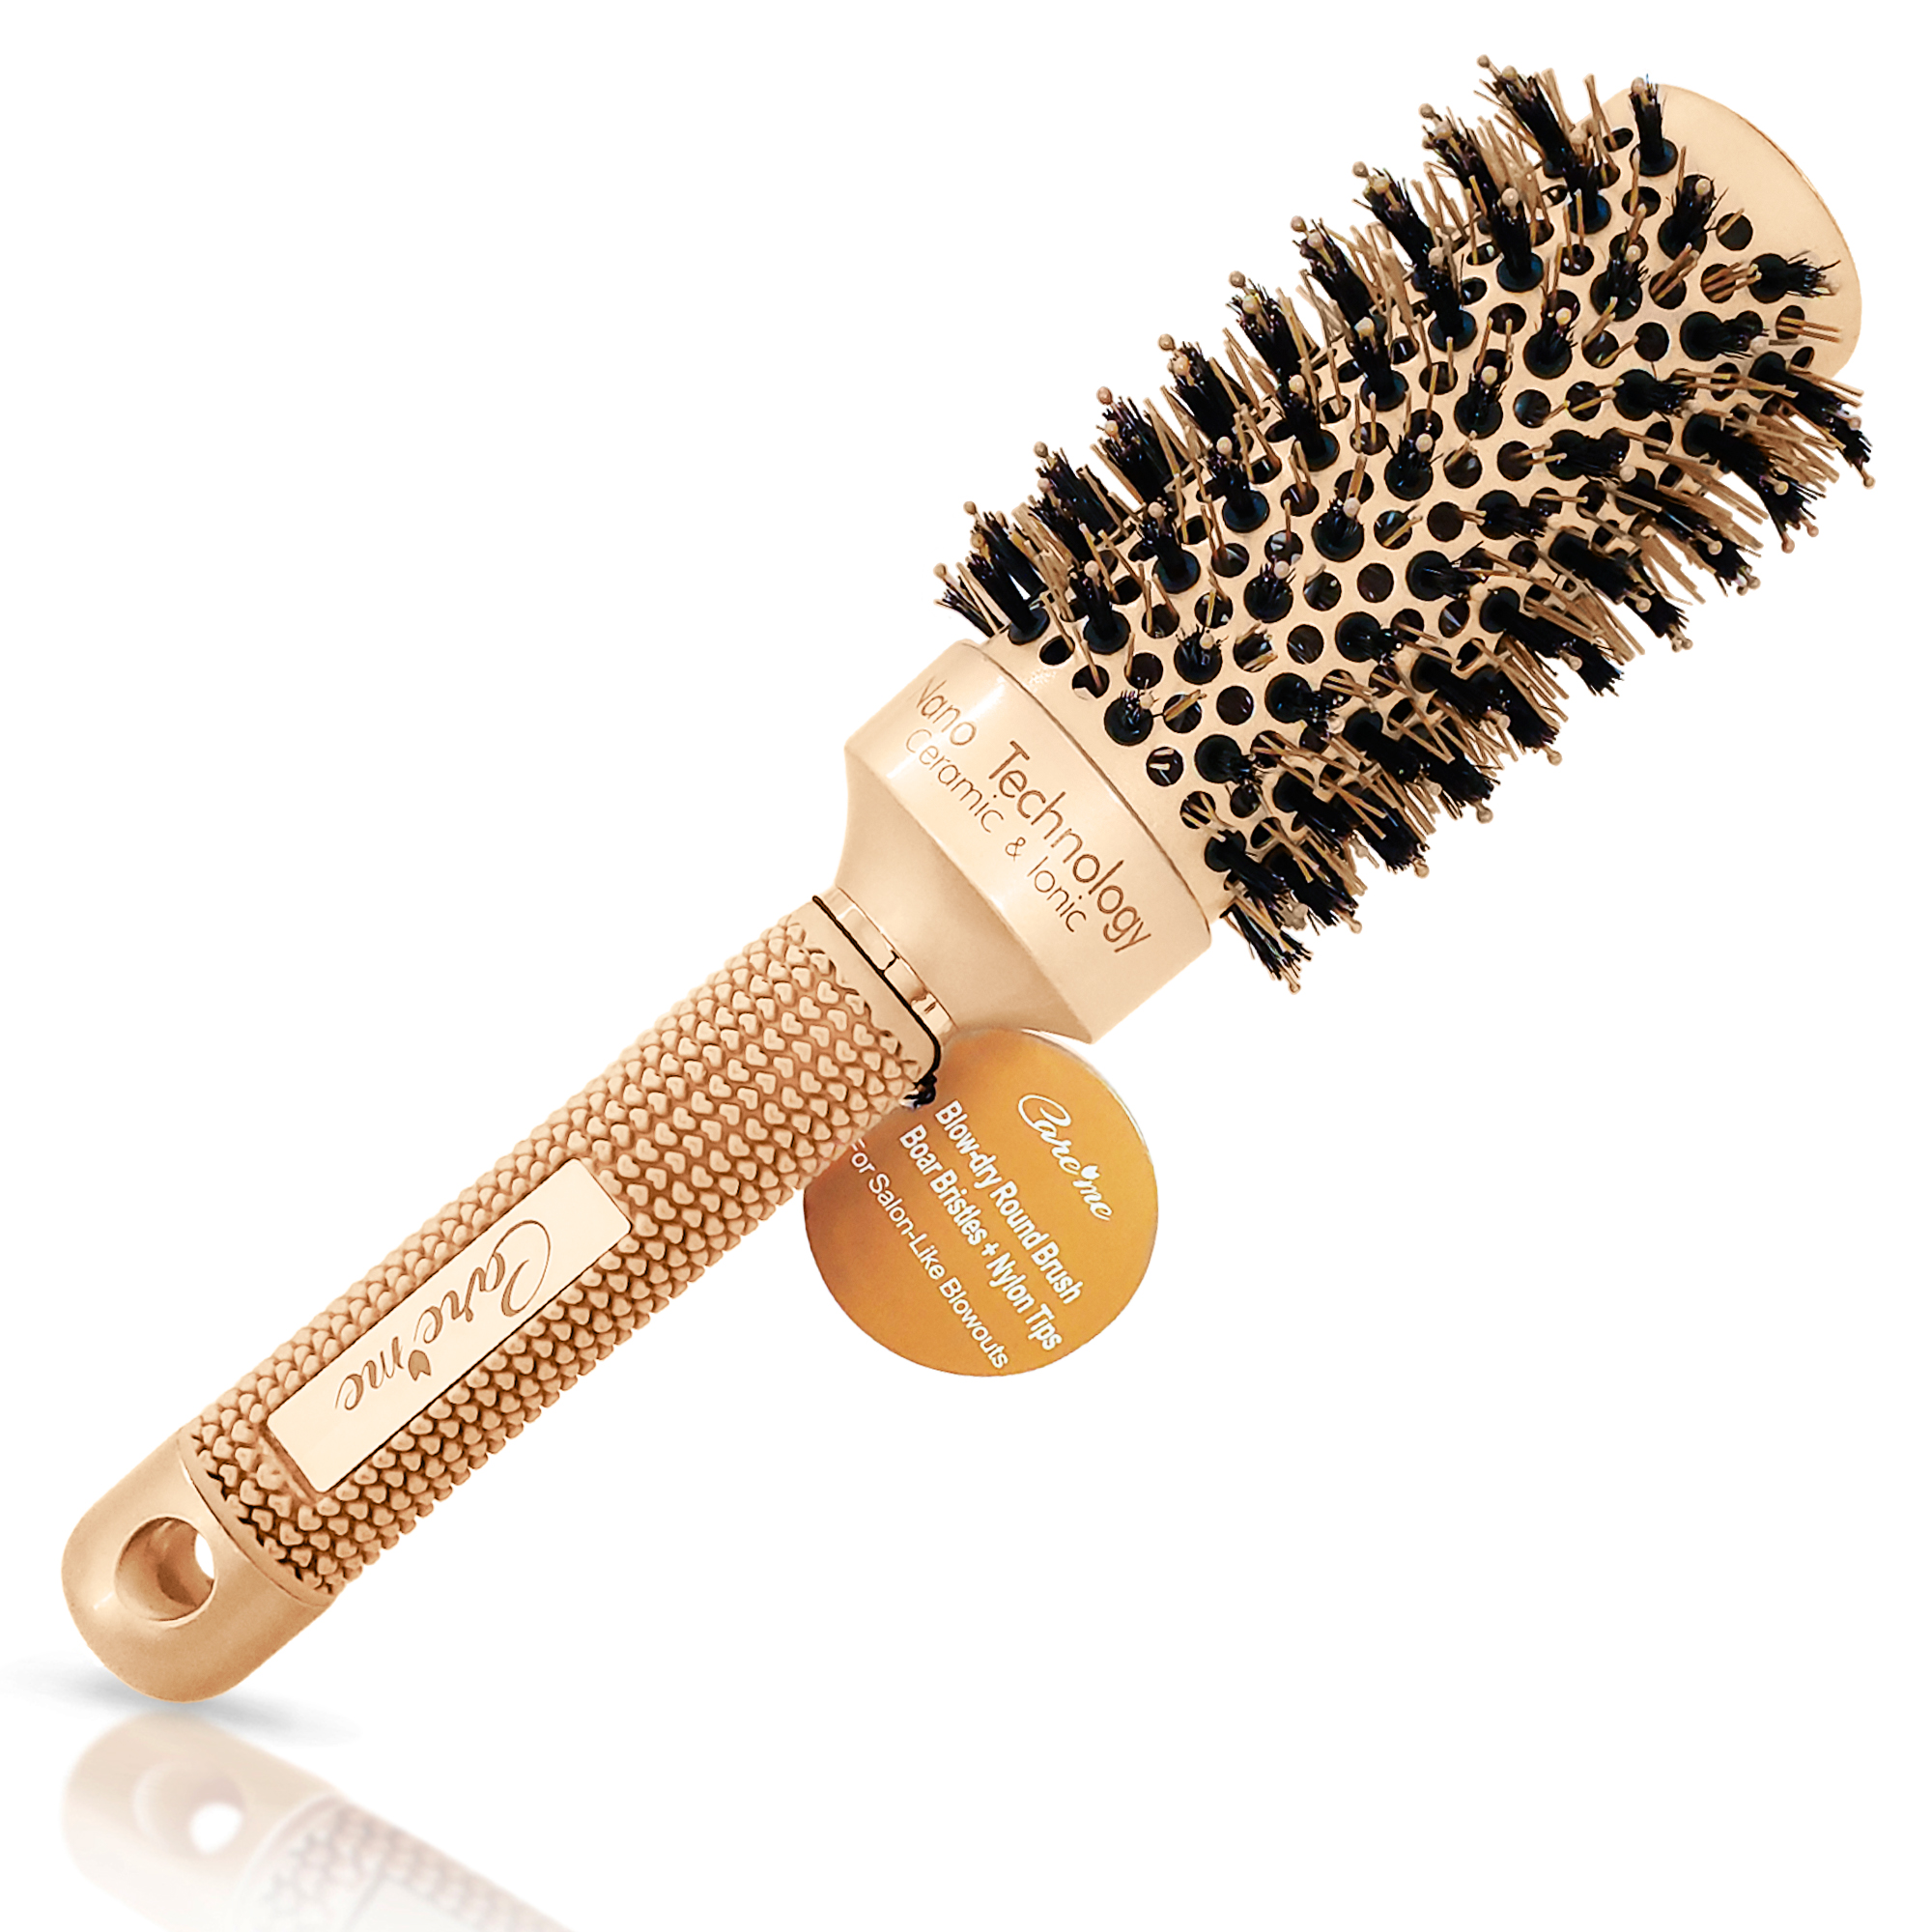 Professional Styling Blow-dry Round Hair Brush for Blowout with Natural  Boars (1.7 inch)